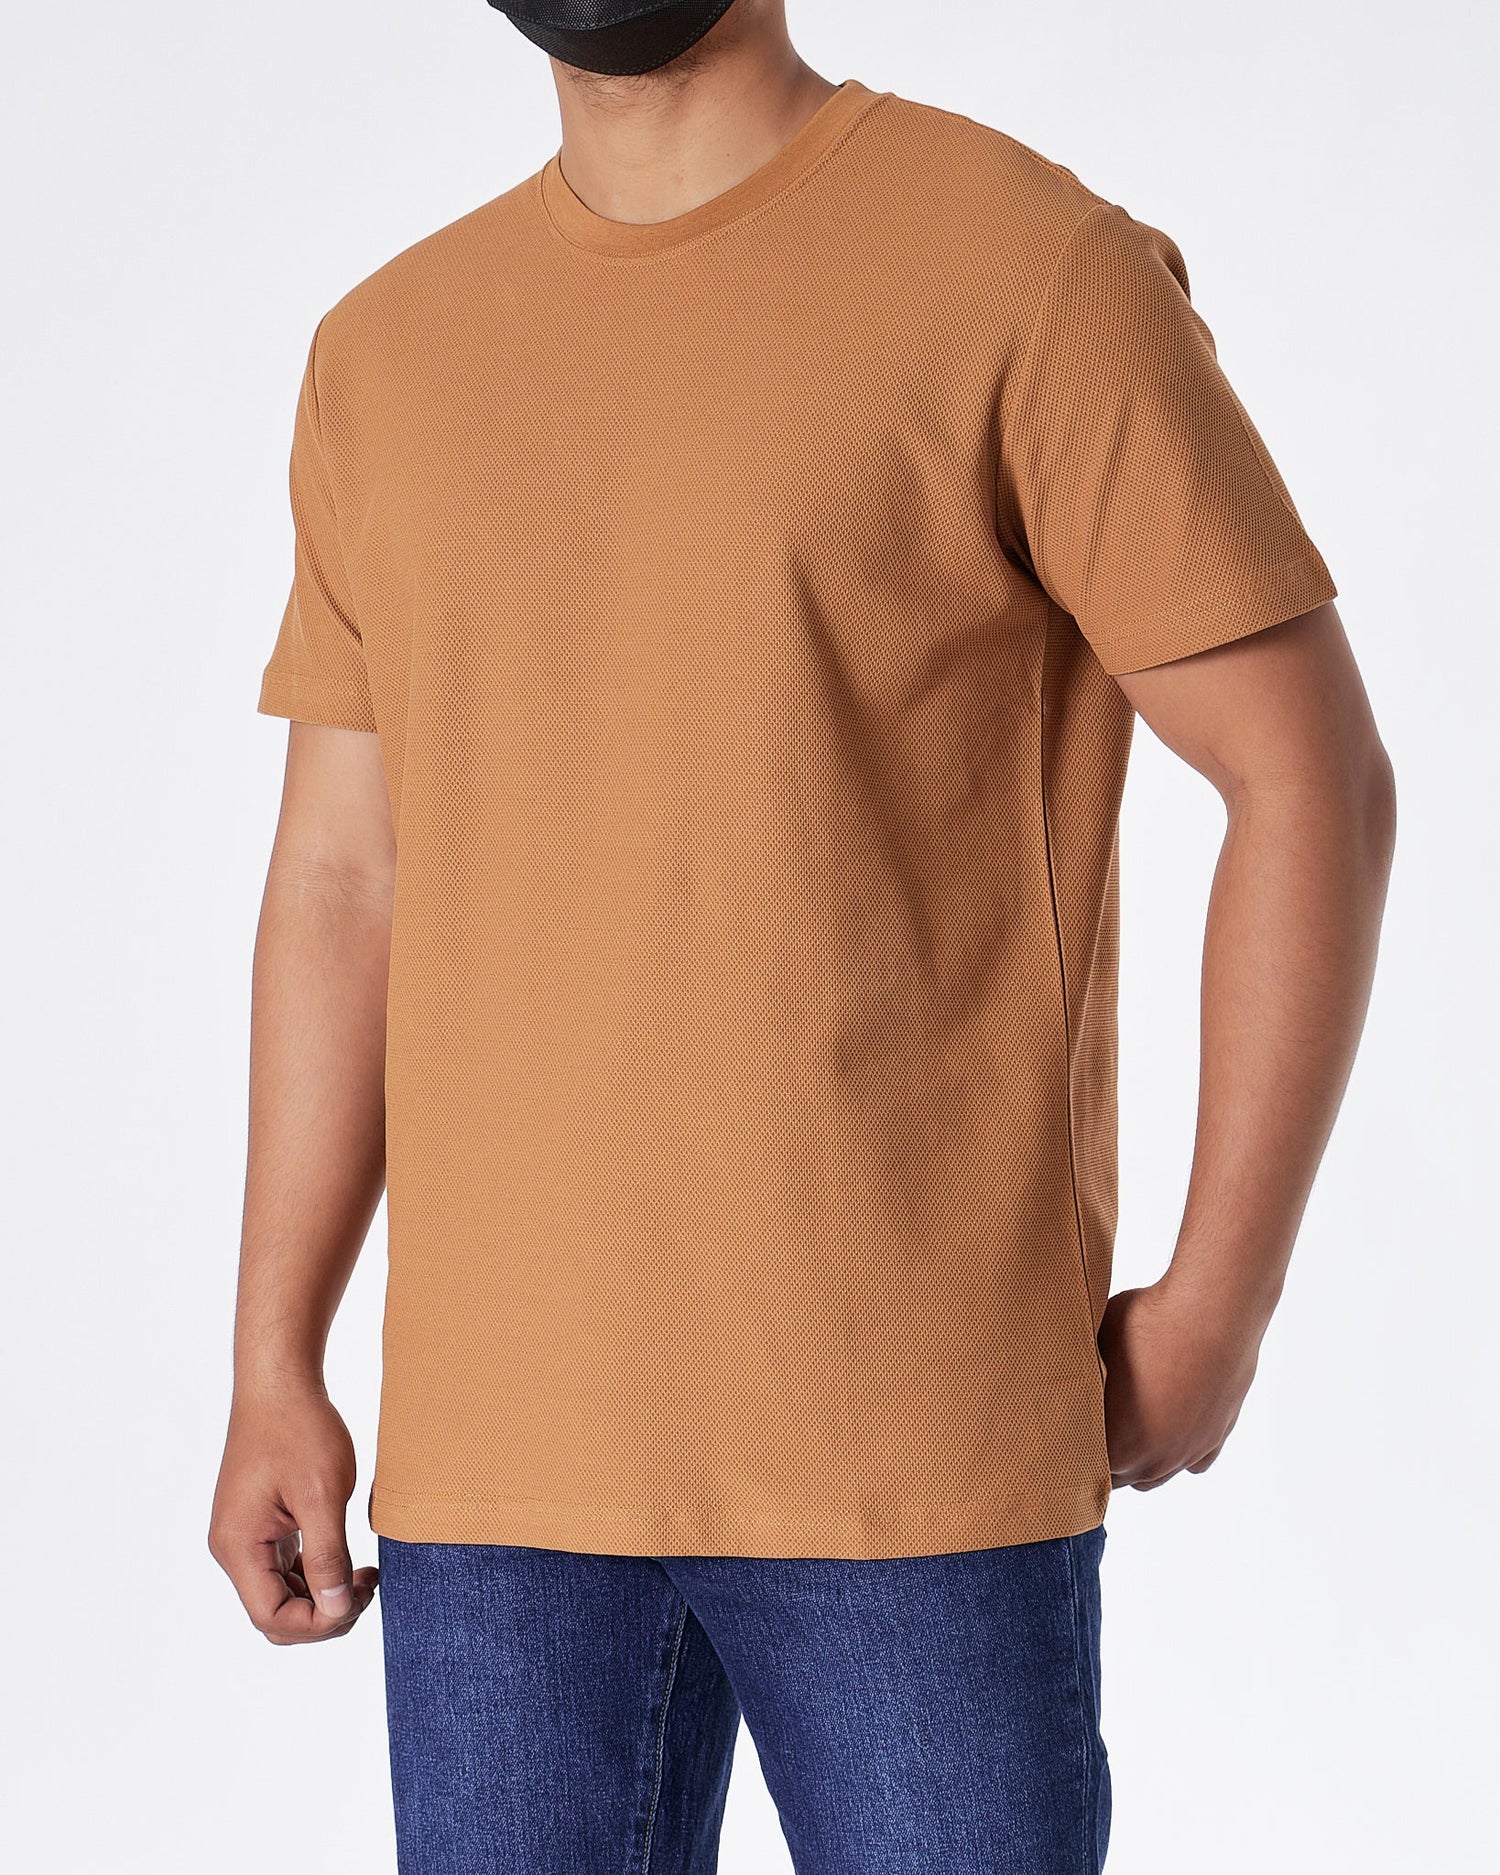 MOI OUTFIT-ABA Solid Color Comfort Men Brown T-Shirt 14.90